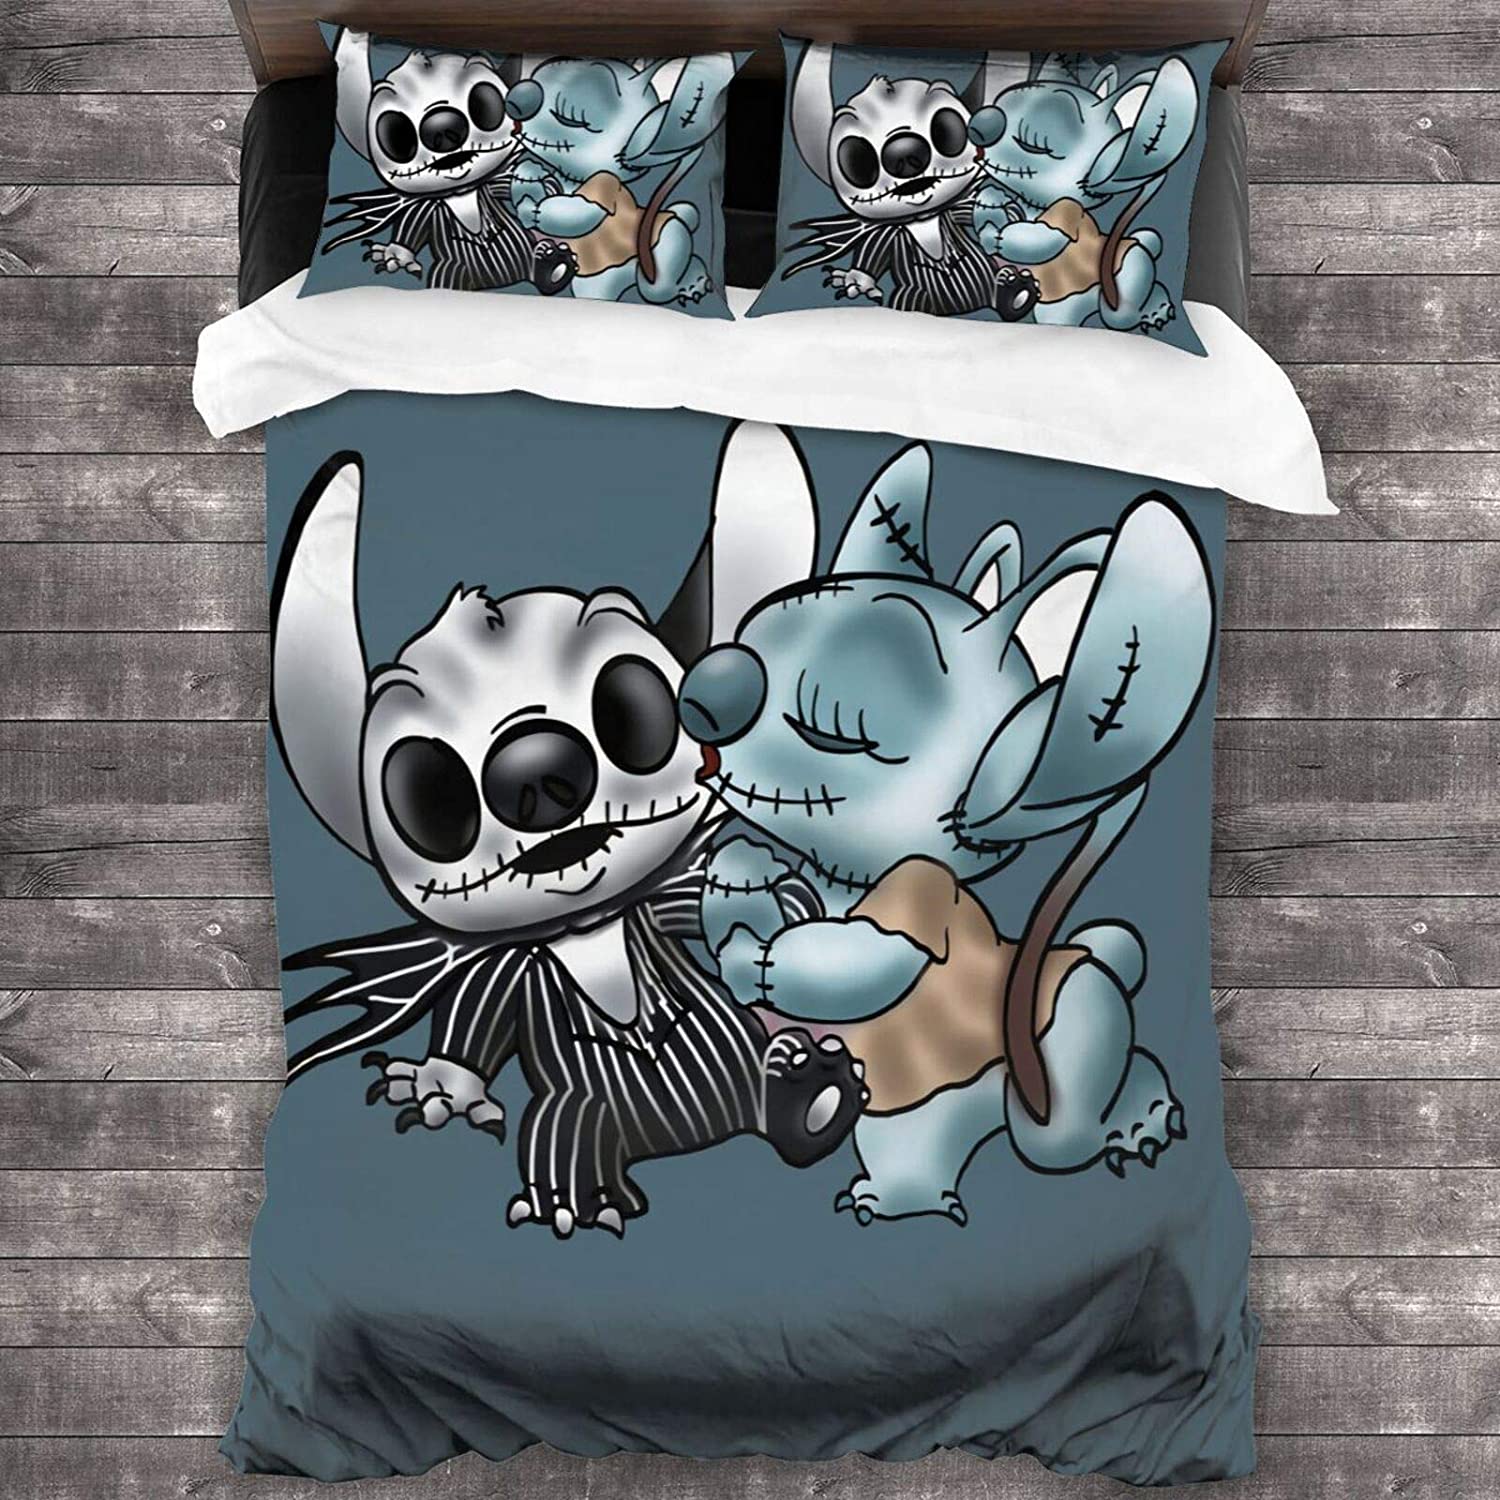 Stitch & Angel The Nightmare Before Christmas Bedding Set